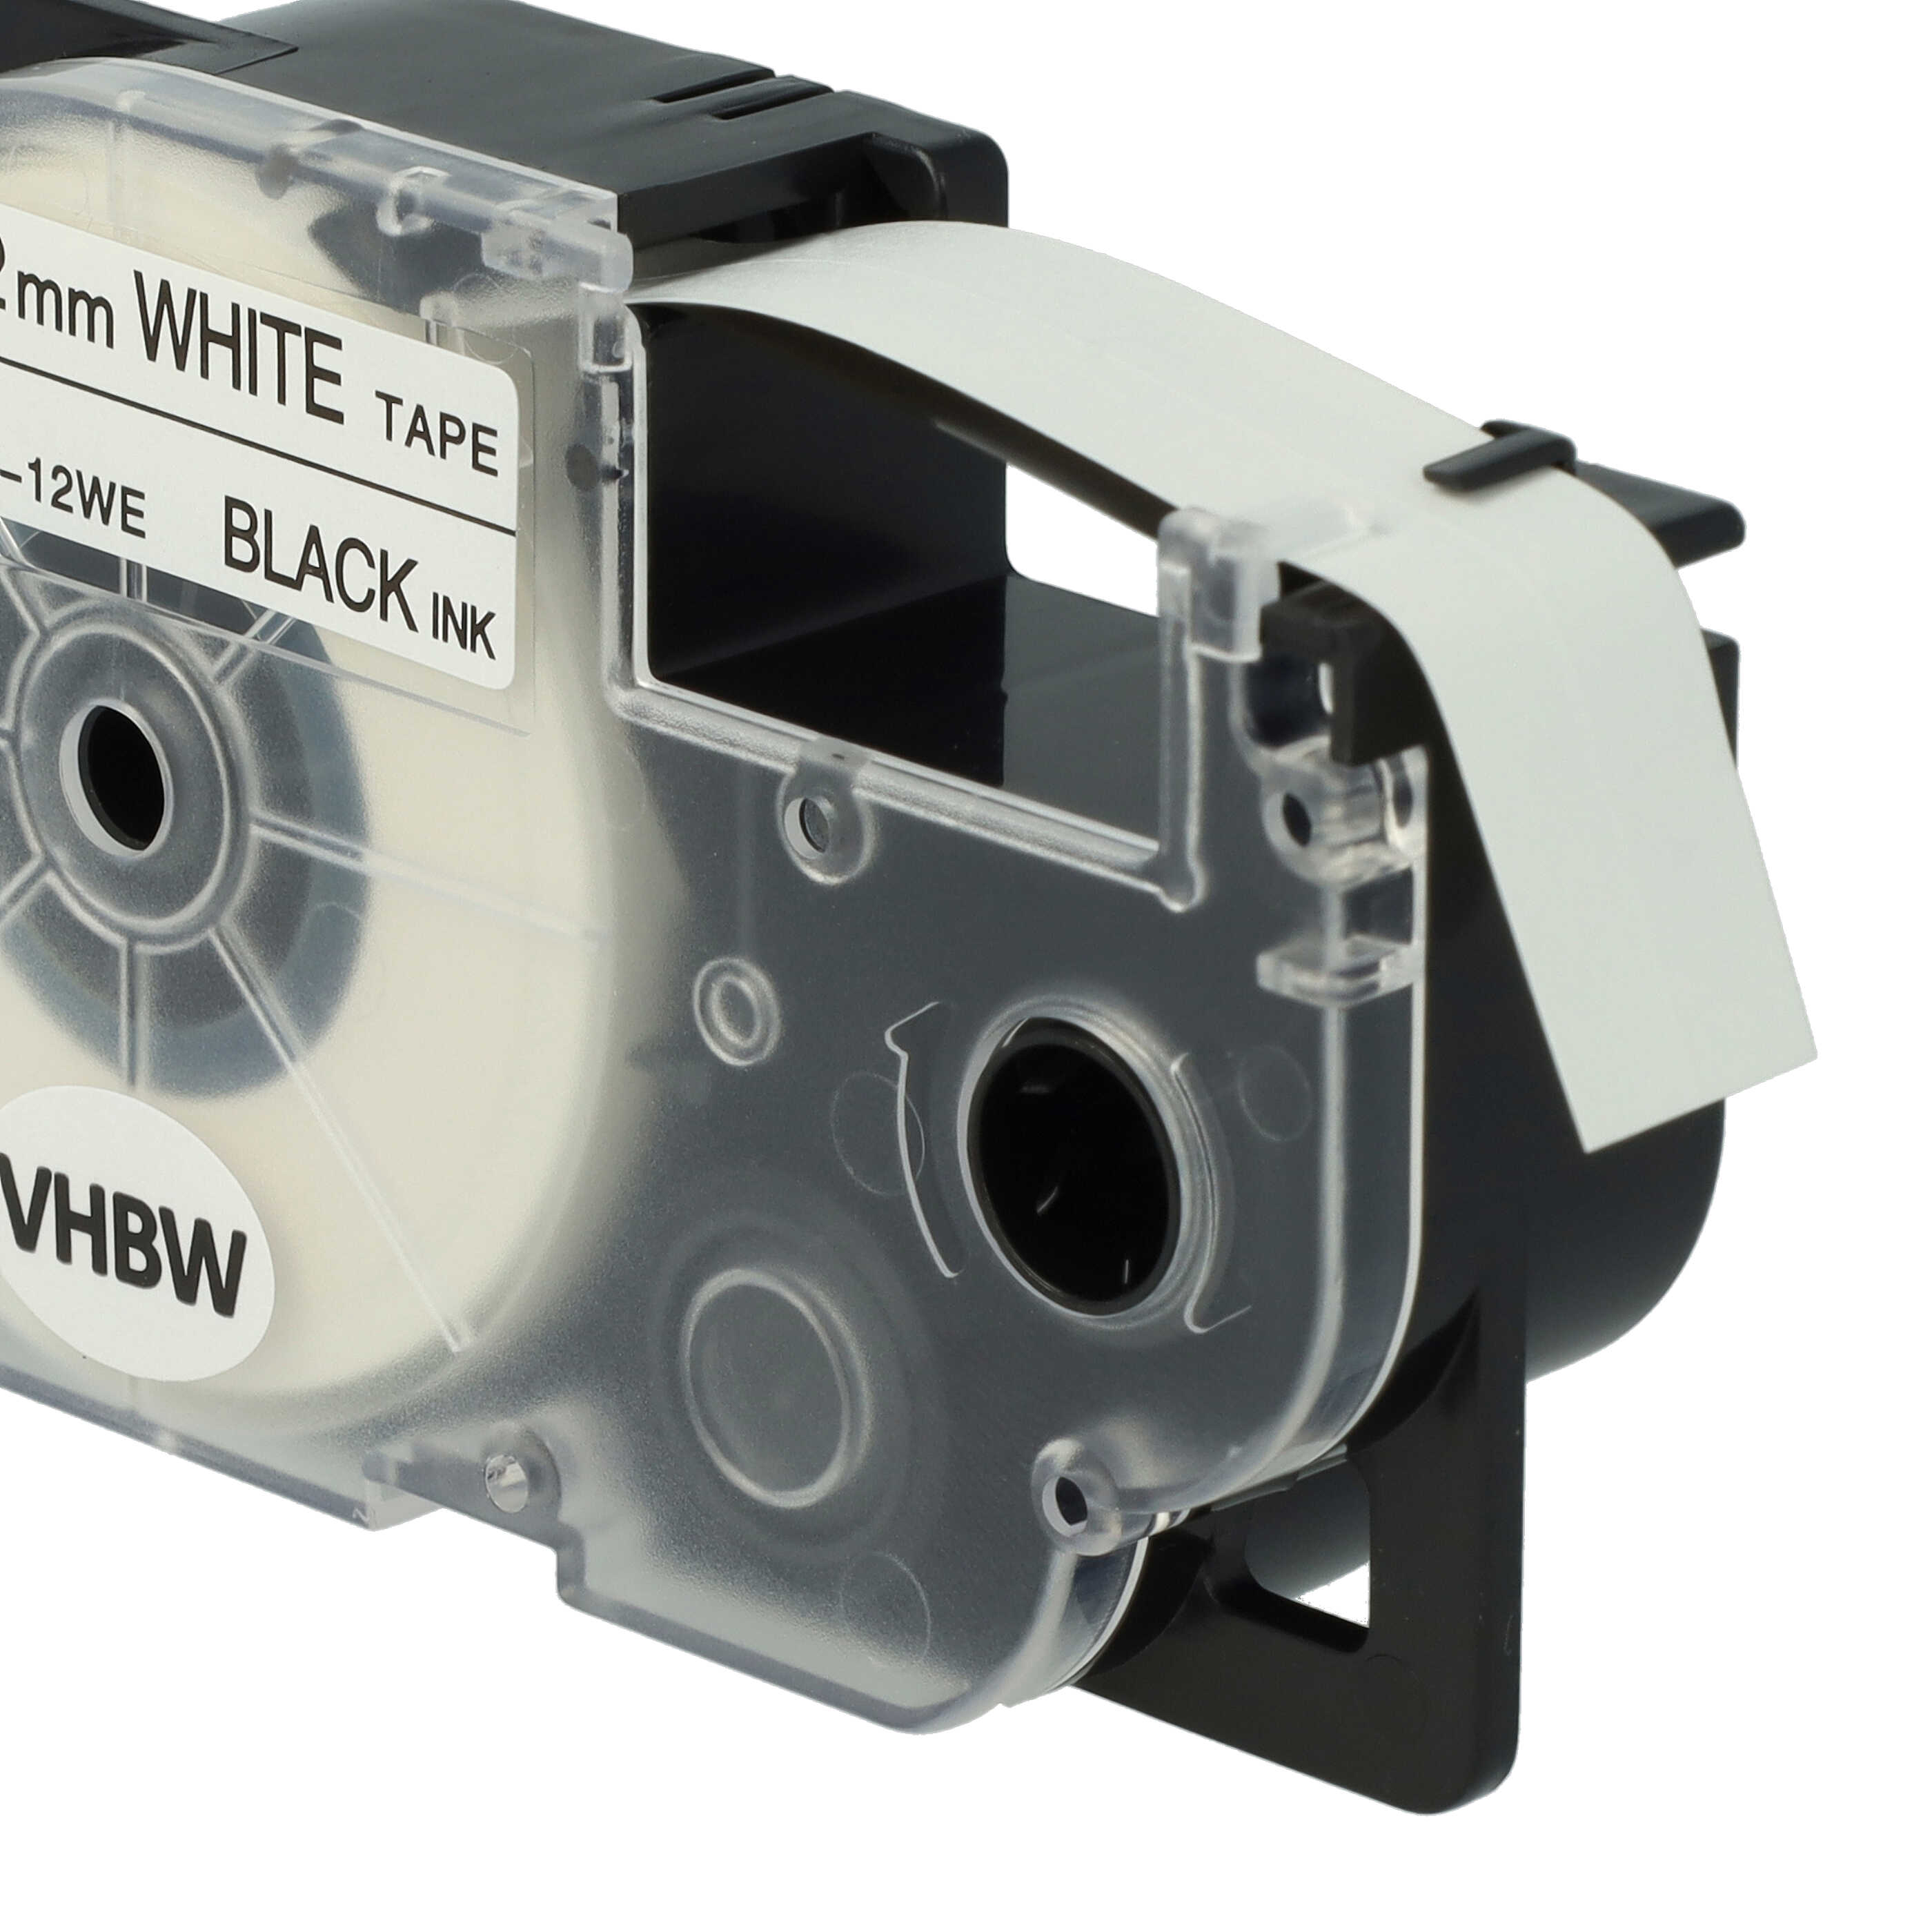 3x Label Tape as Replacement for Casio XR-12WE, XR-12WE1 - 12 mm Black to White